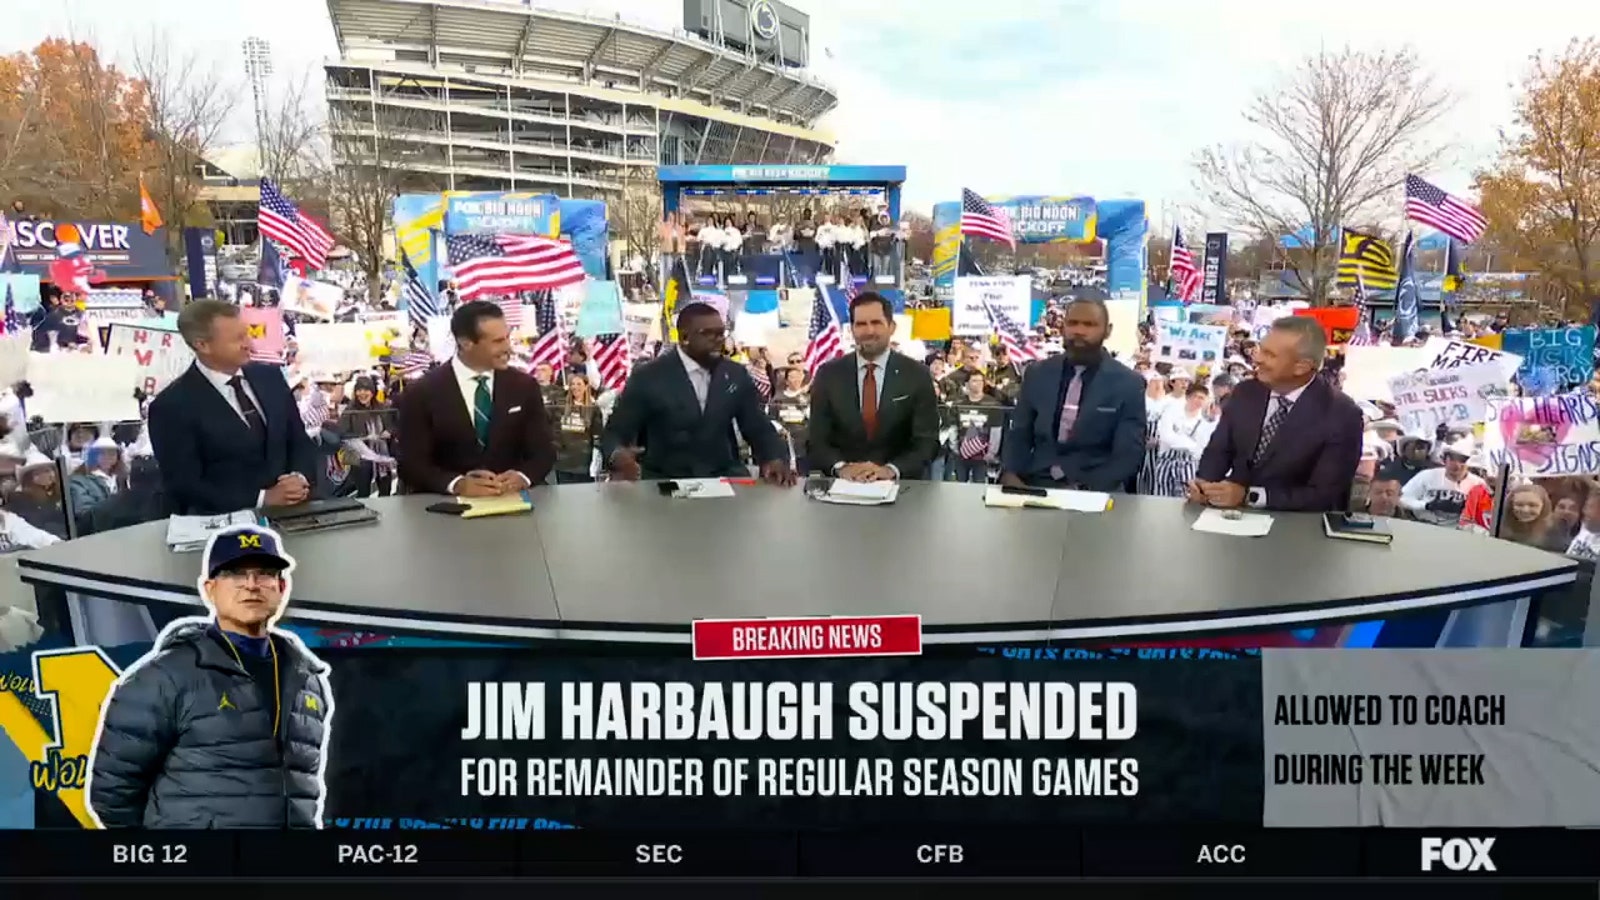 'Big Noon Kickoff' crew discusses the Jim Harbaugh situation